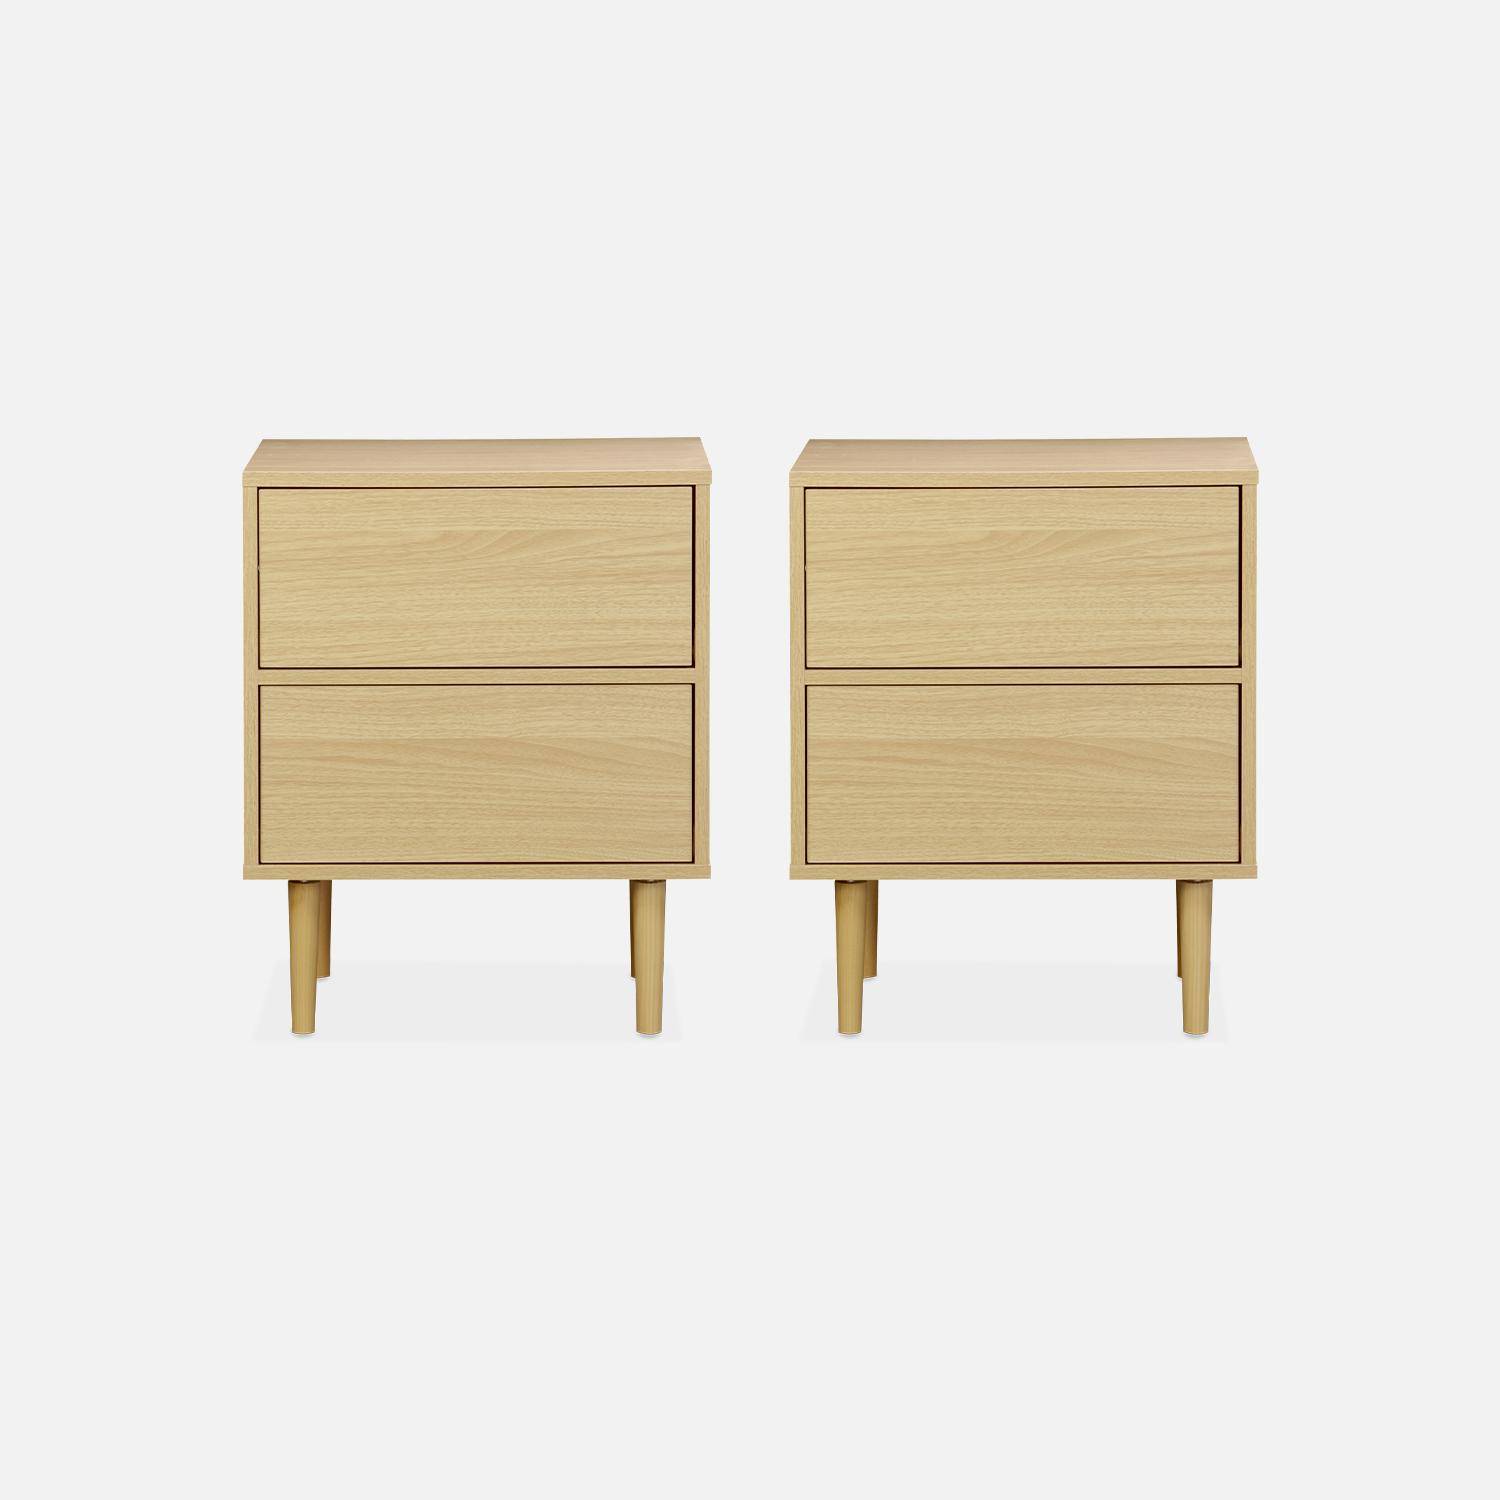 Pair of wood-effect bedside tables with two drawers, 48x40x59cm - Mika - Natural Wood,sweeek,Photo4